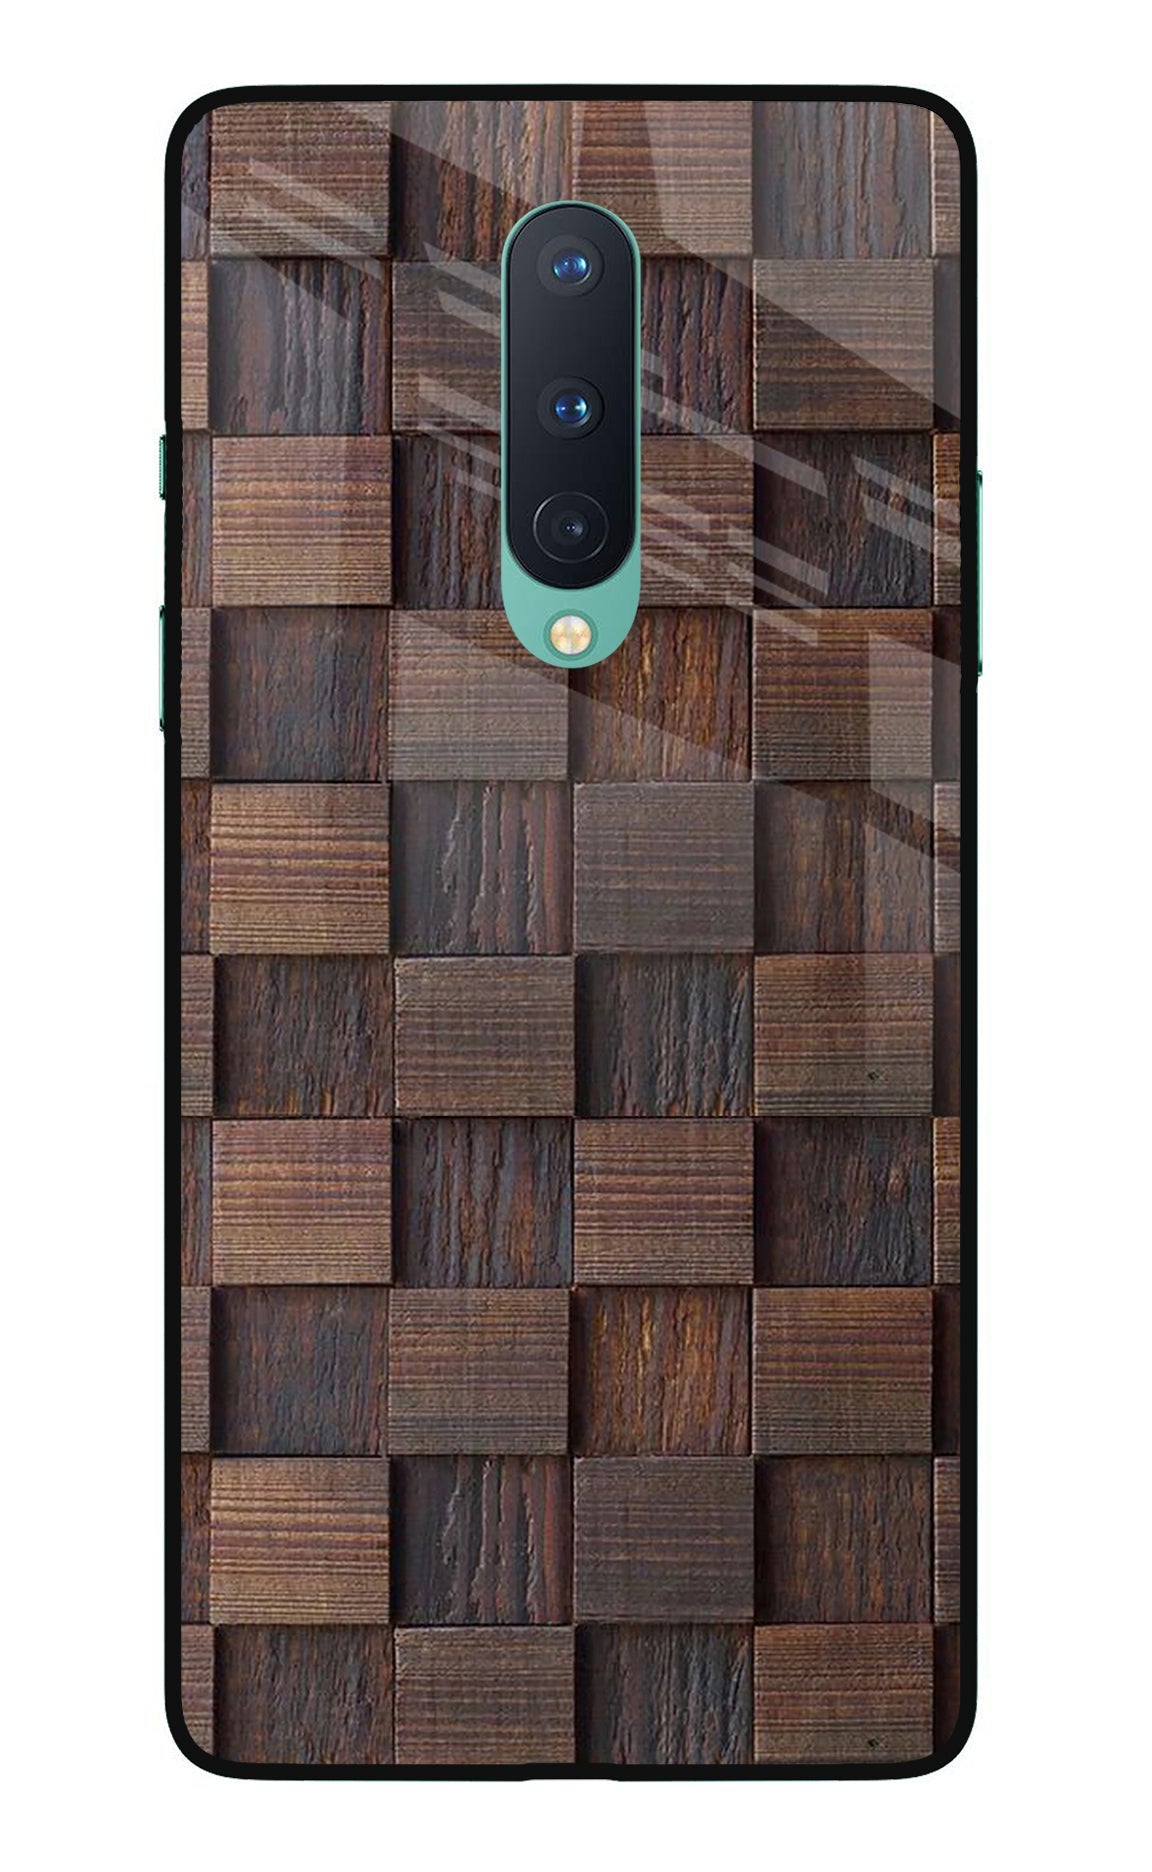 Wooden Cube Design Oneplus 8 Glass Case